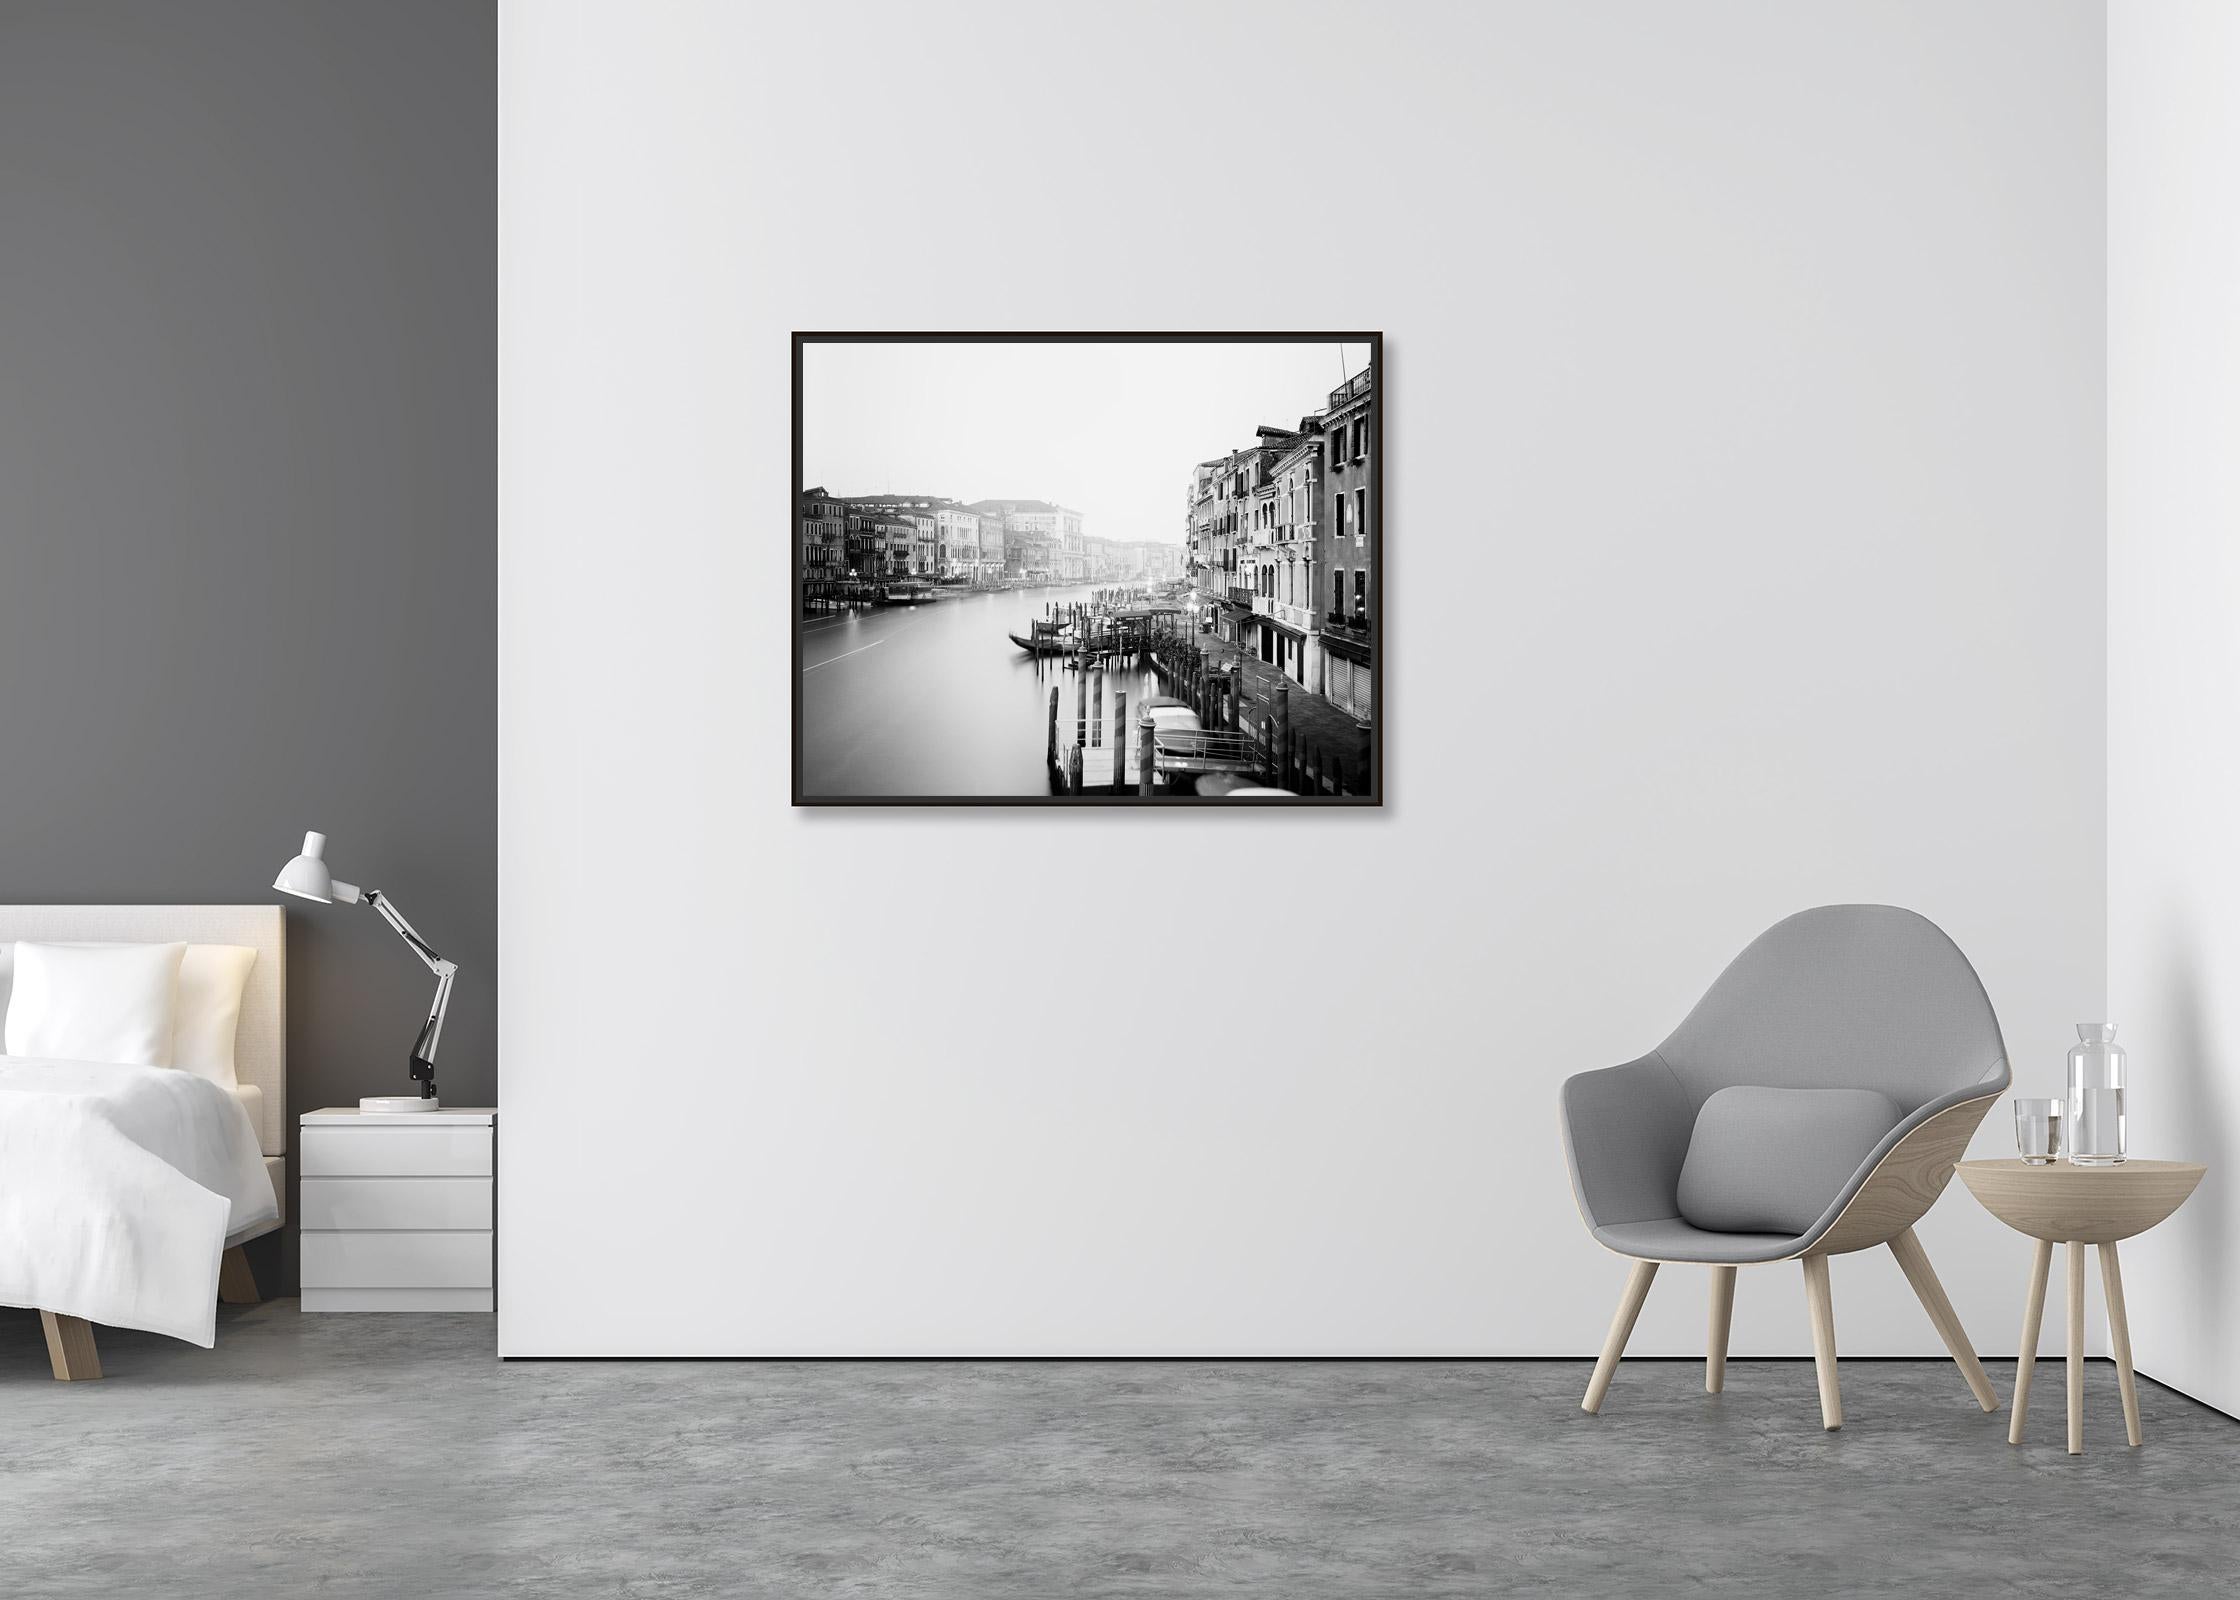 Canal Grande, Rialto Bridge View, Venice, black and white landscape photography - Contemporary Photograph by Gerald Berghammer